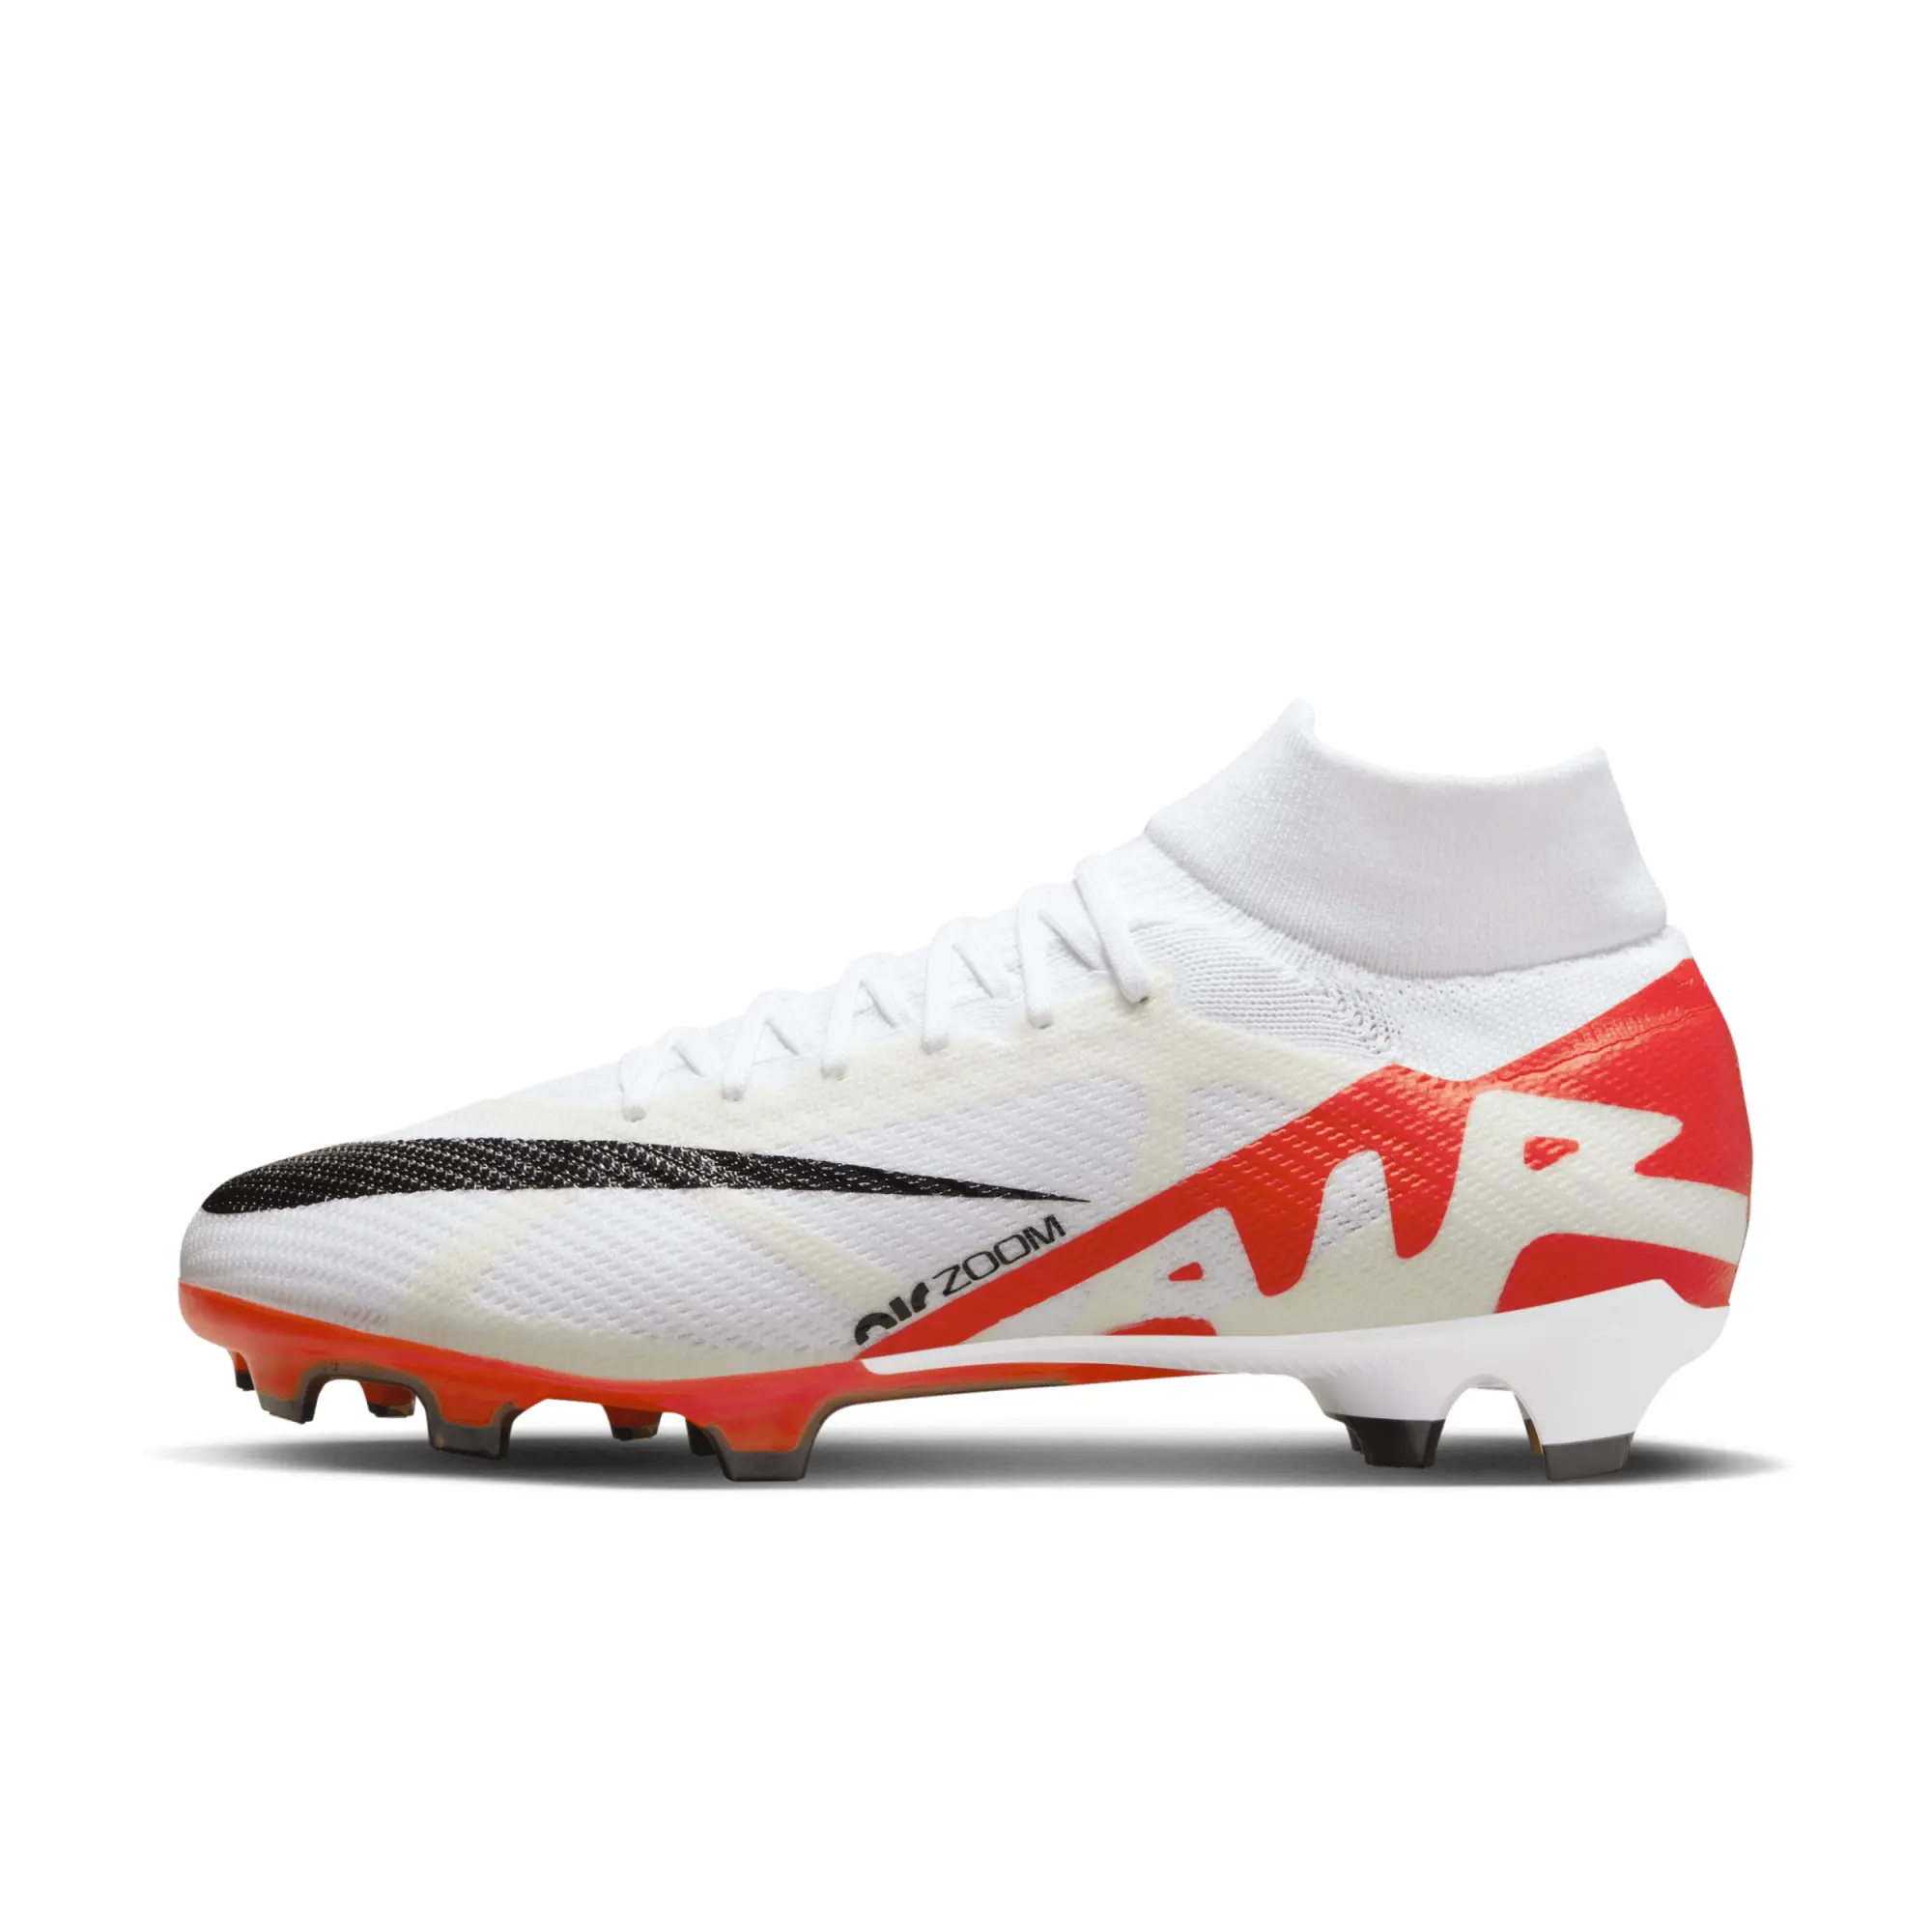 Nike Mercurial Superfly 9 Pro Firm-Ground Football Boot - Red